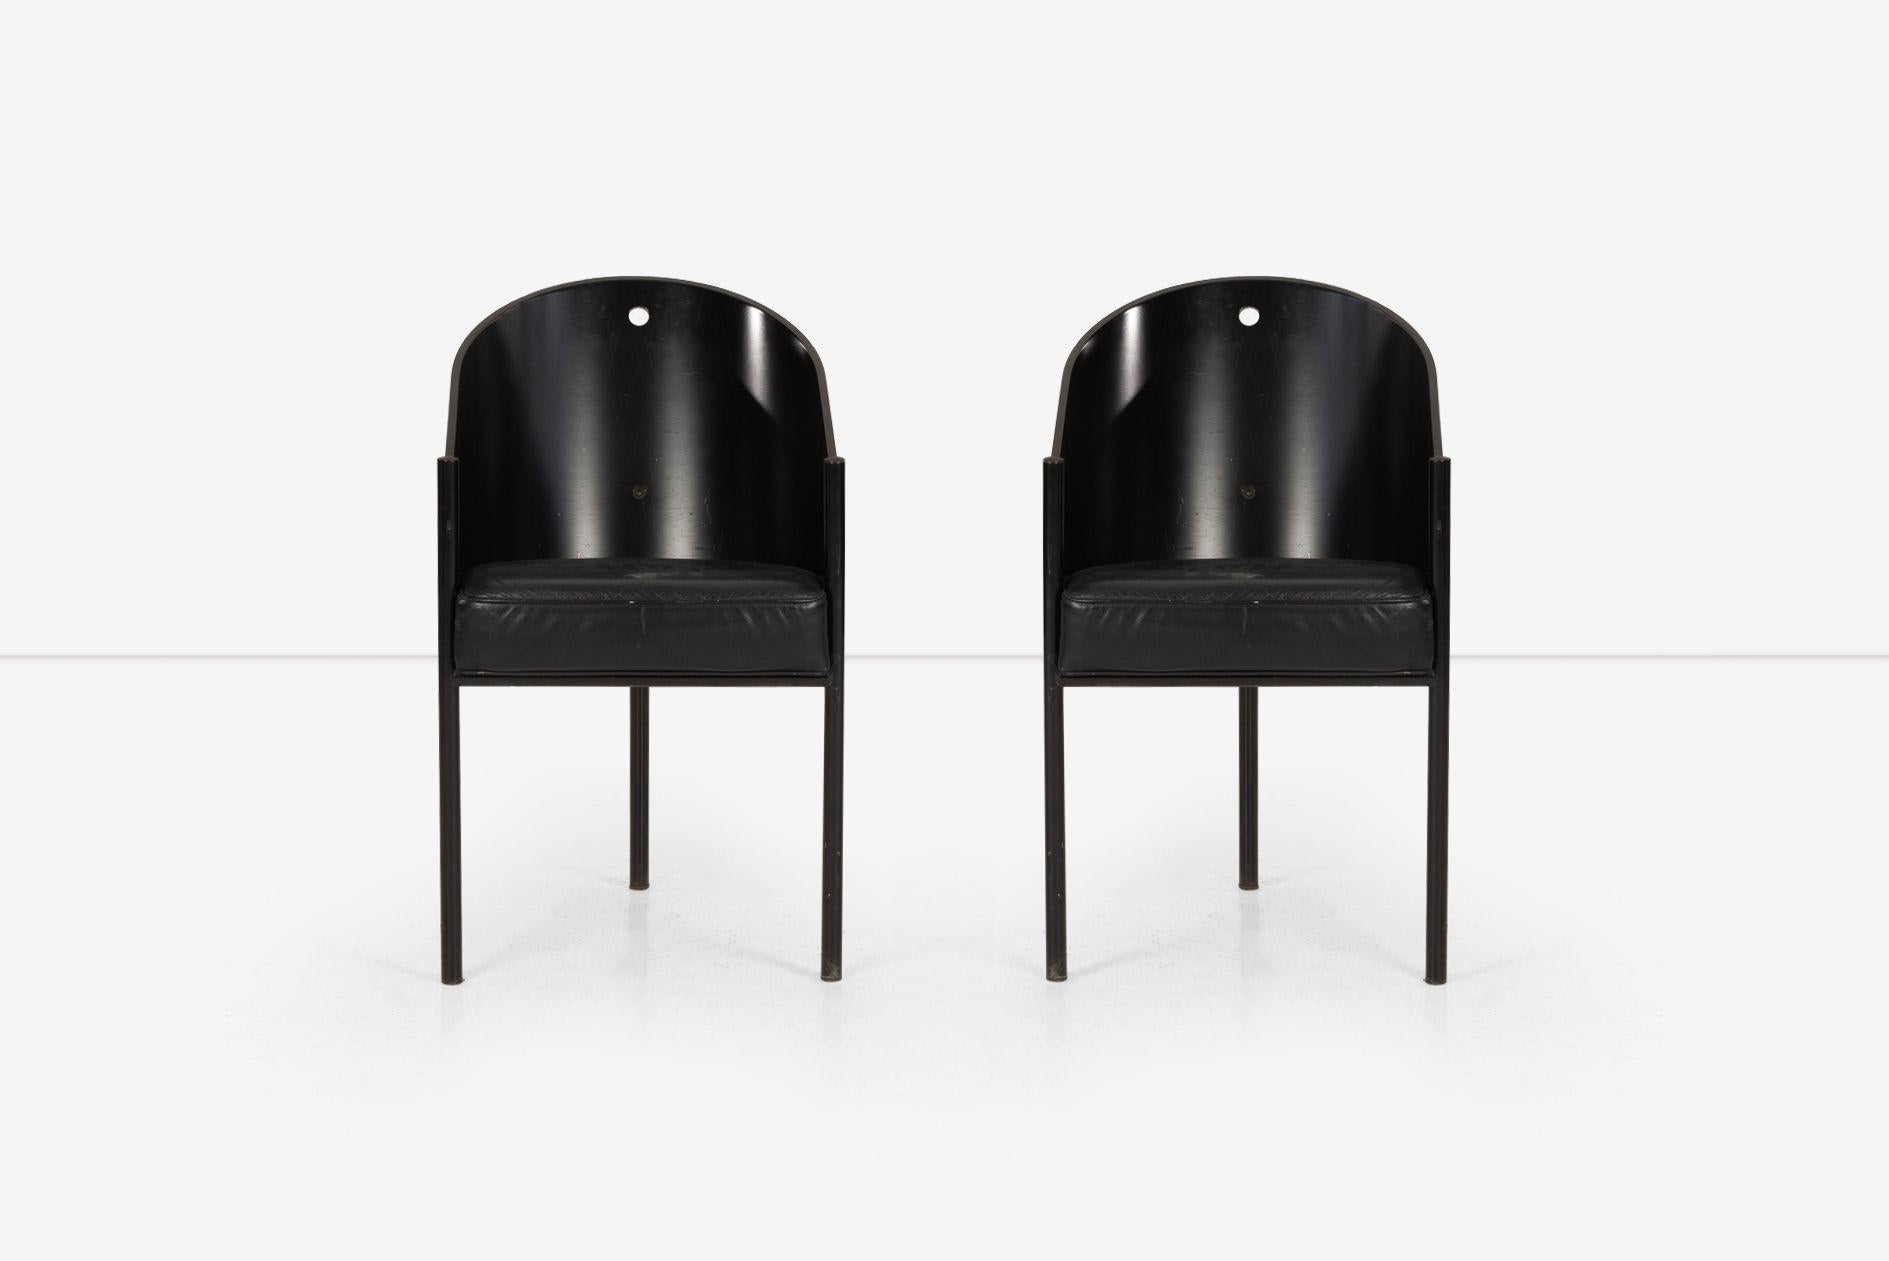 Pair of Philippe Starck Costes Chairs for Driade Aleph 1982
Enameled steel legs, lacquered curved wood back, and leather seat
Dimensions:
31½